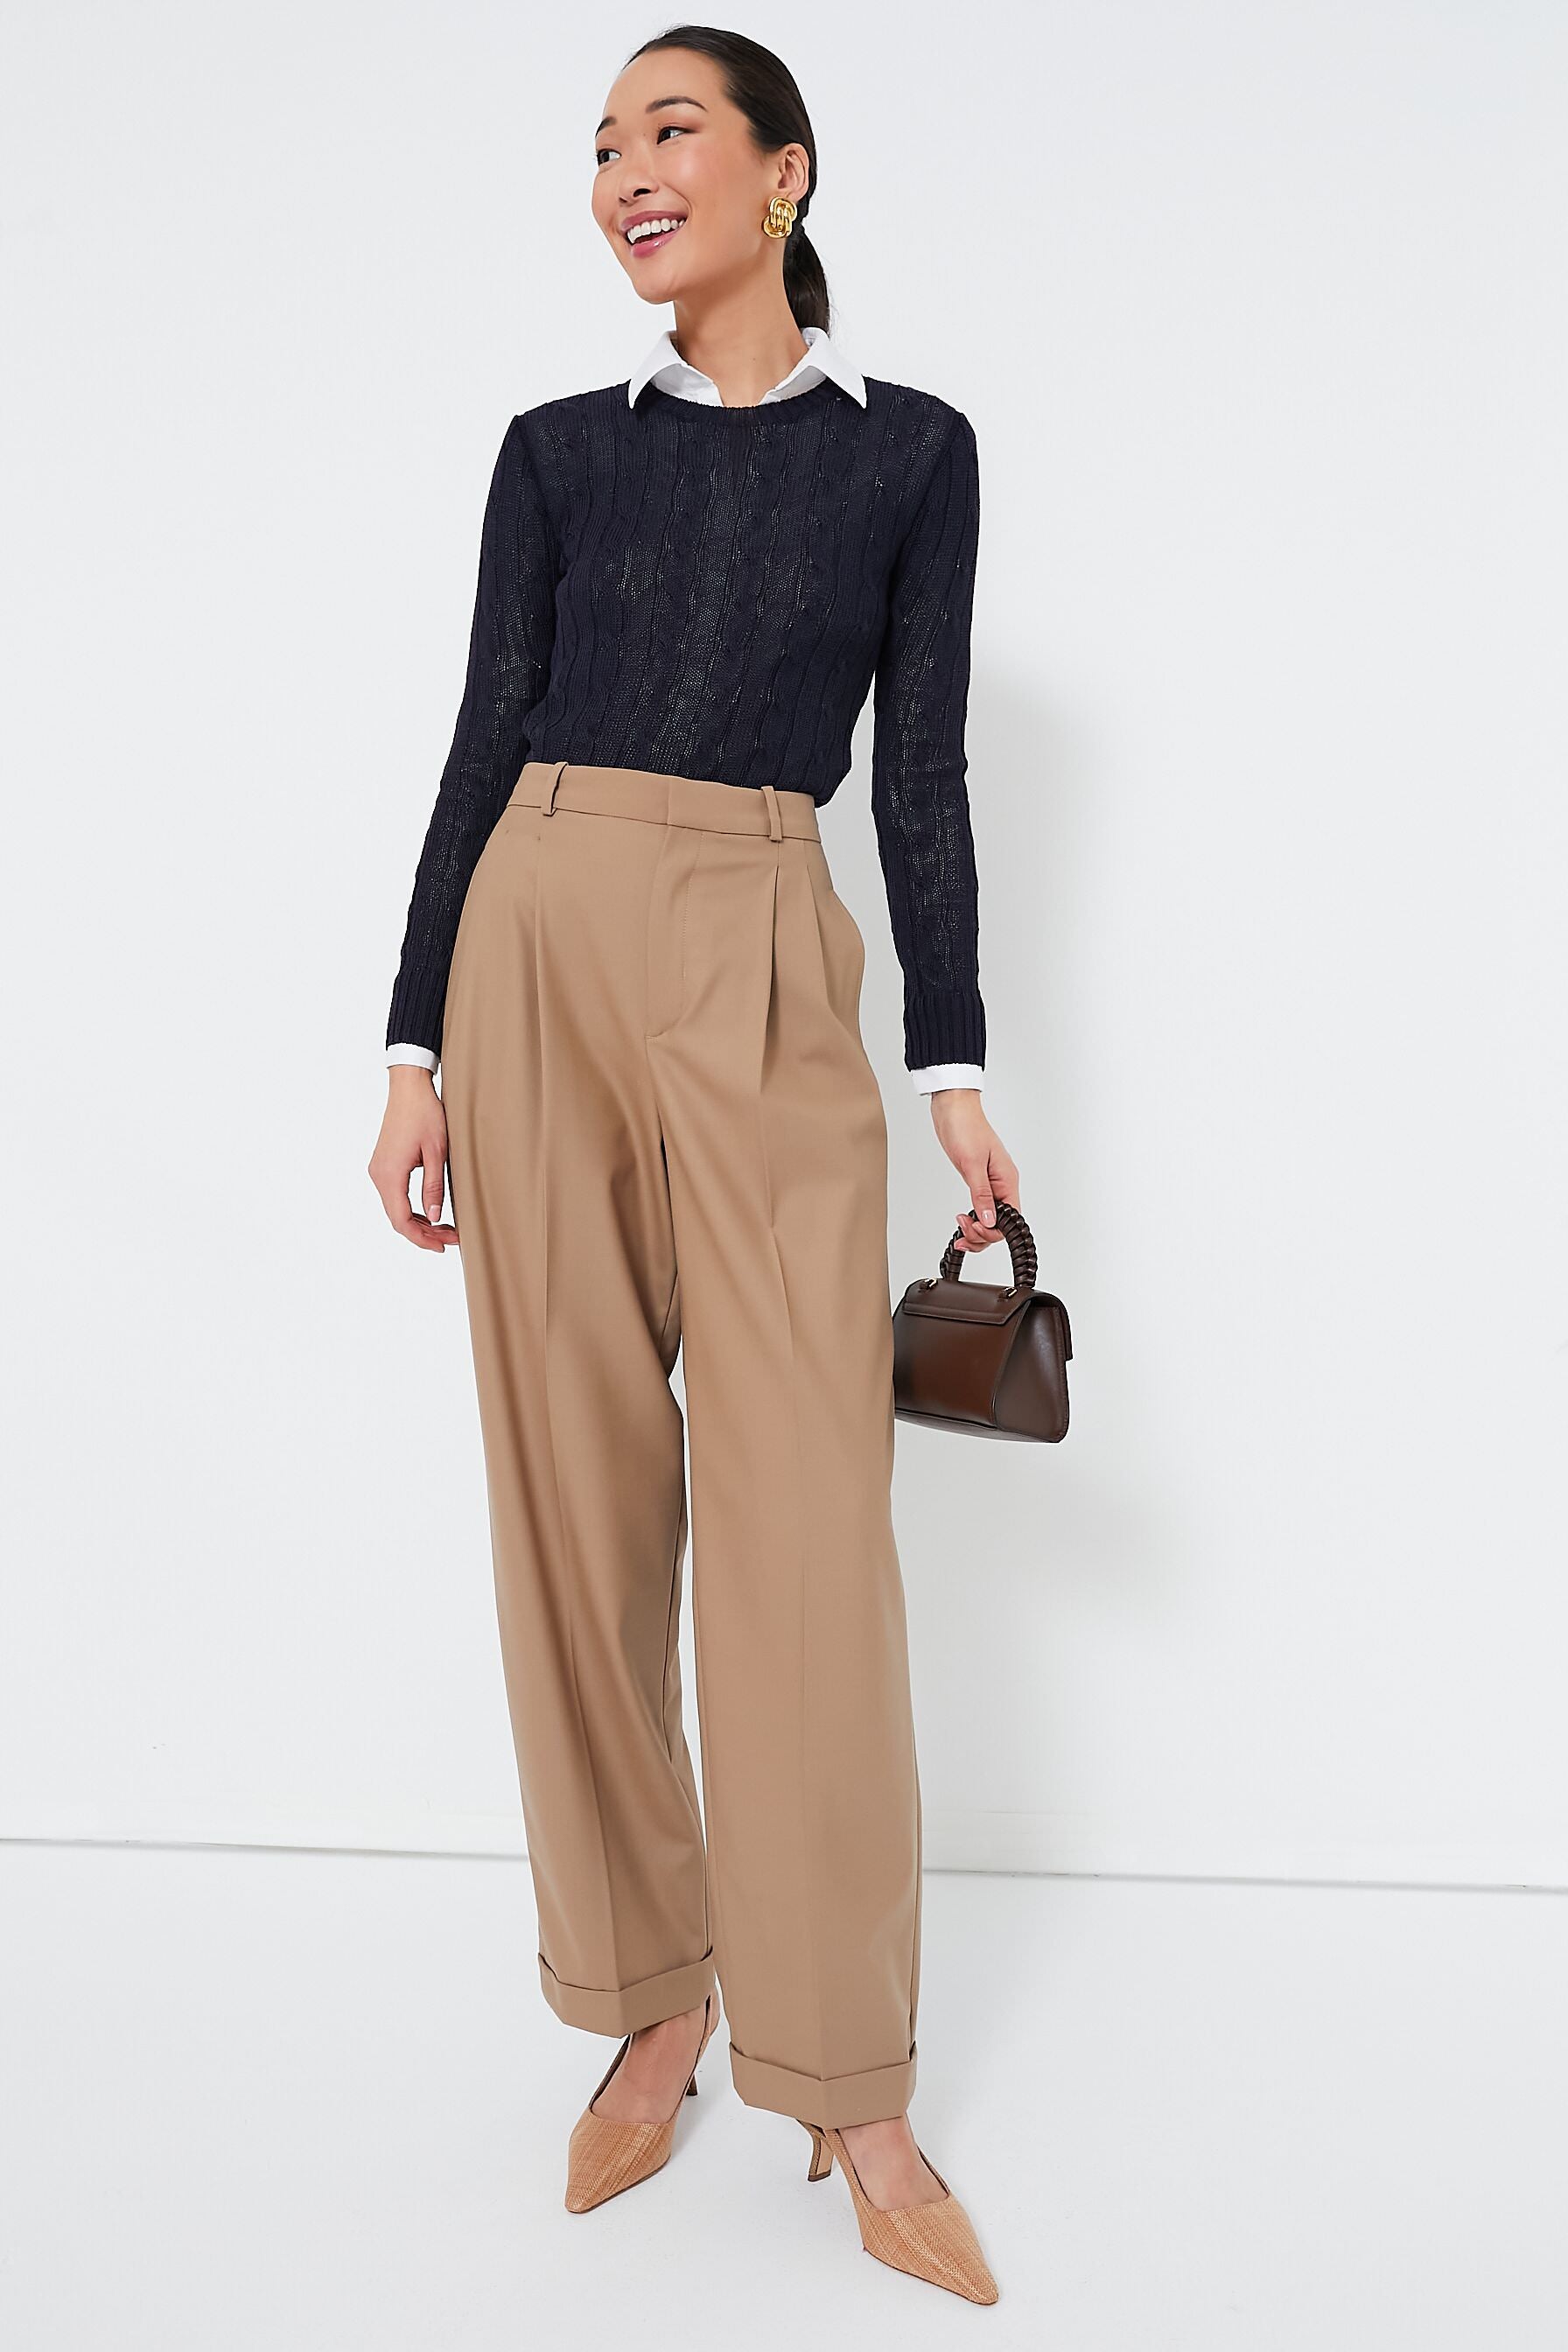 Spring Style: Sapphire Blue High-Waisted Pleated Pants